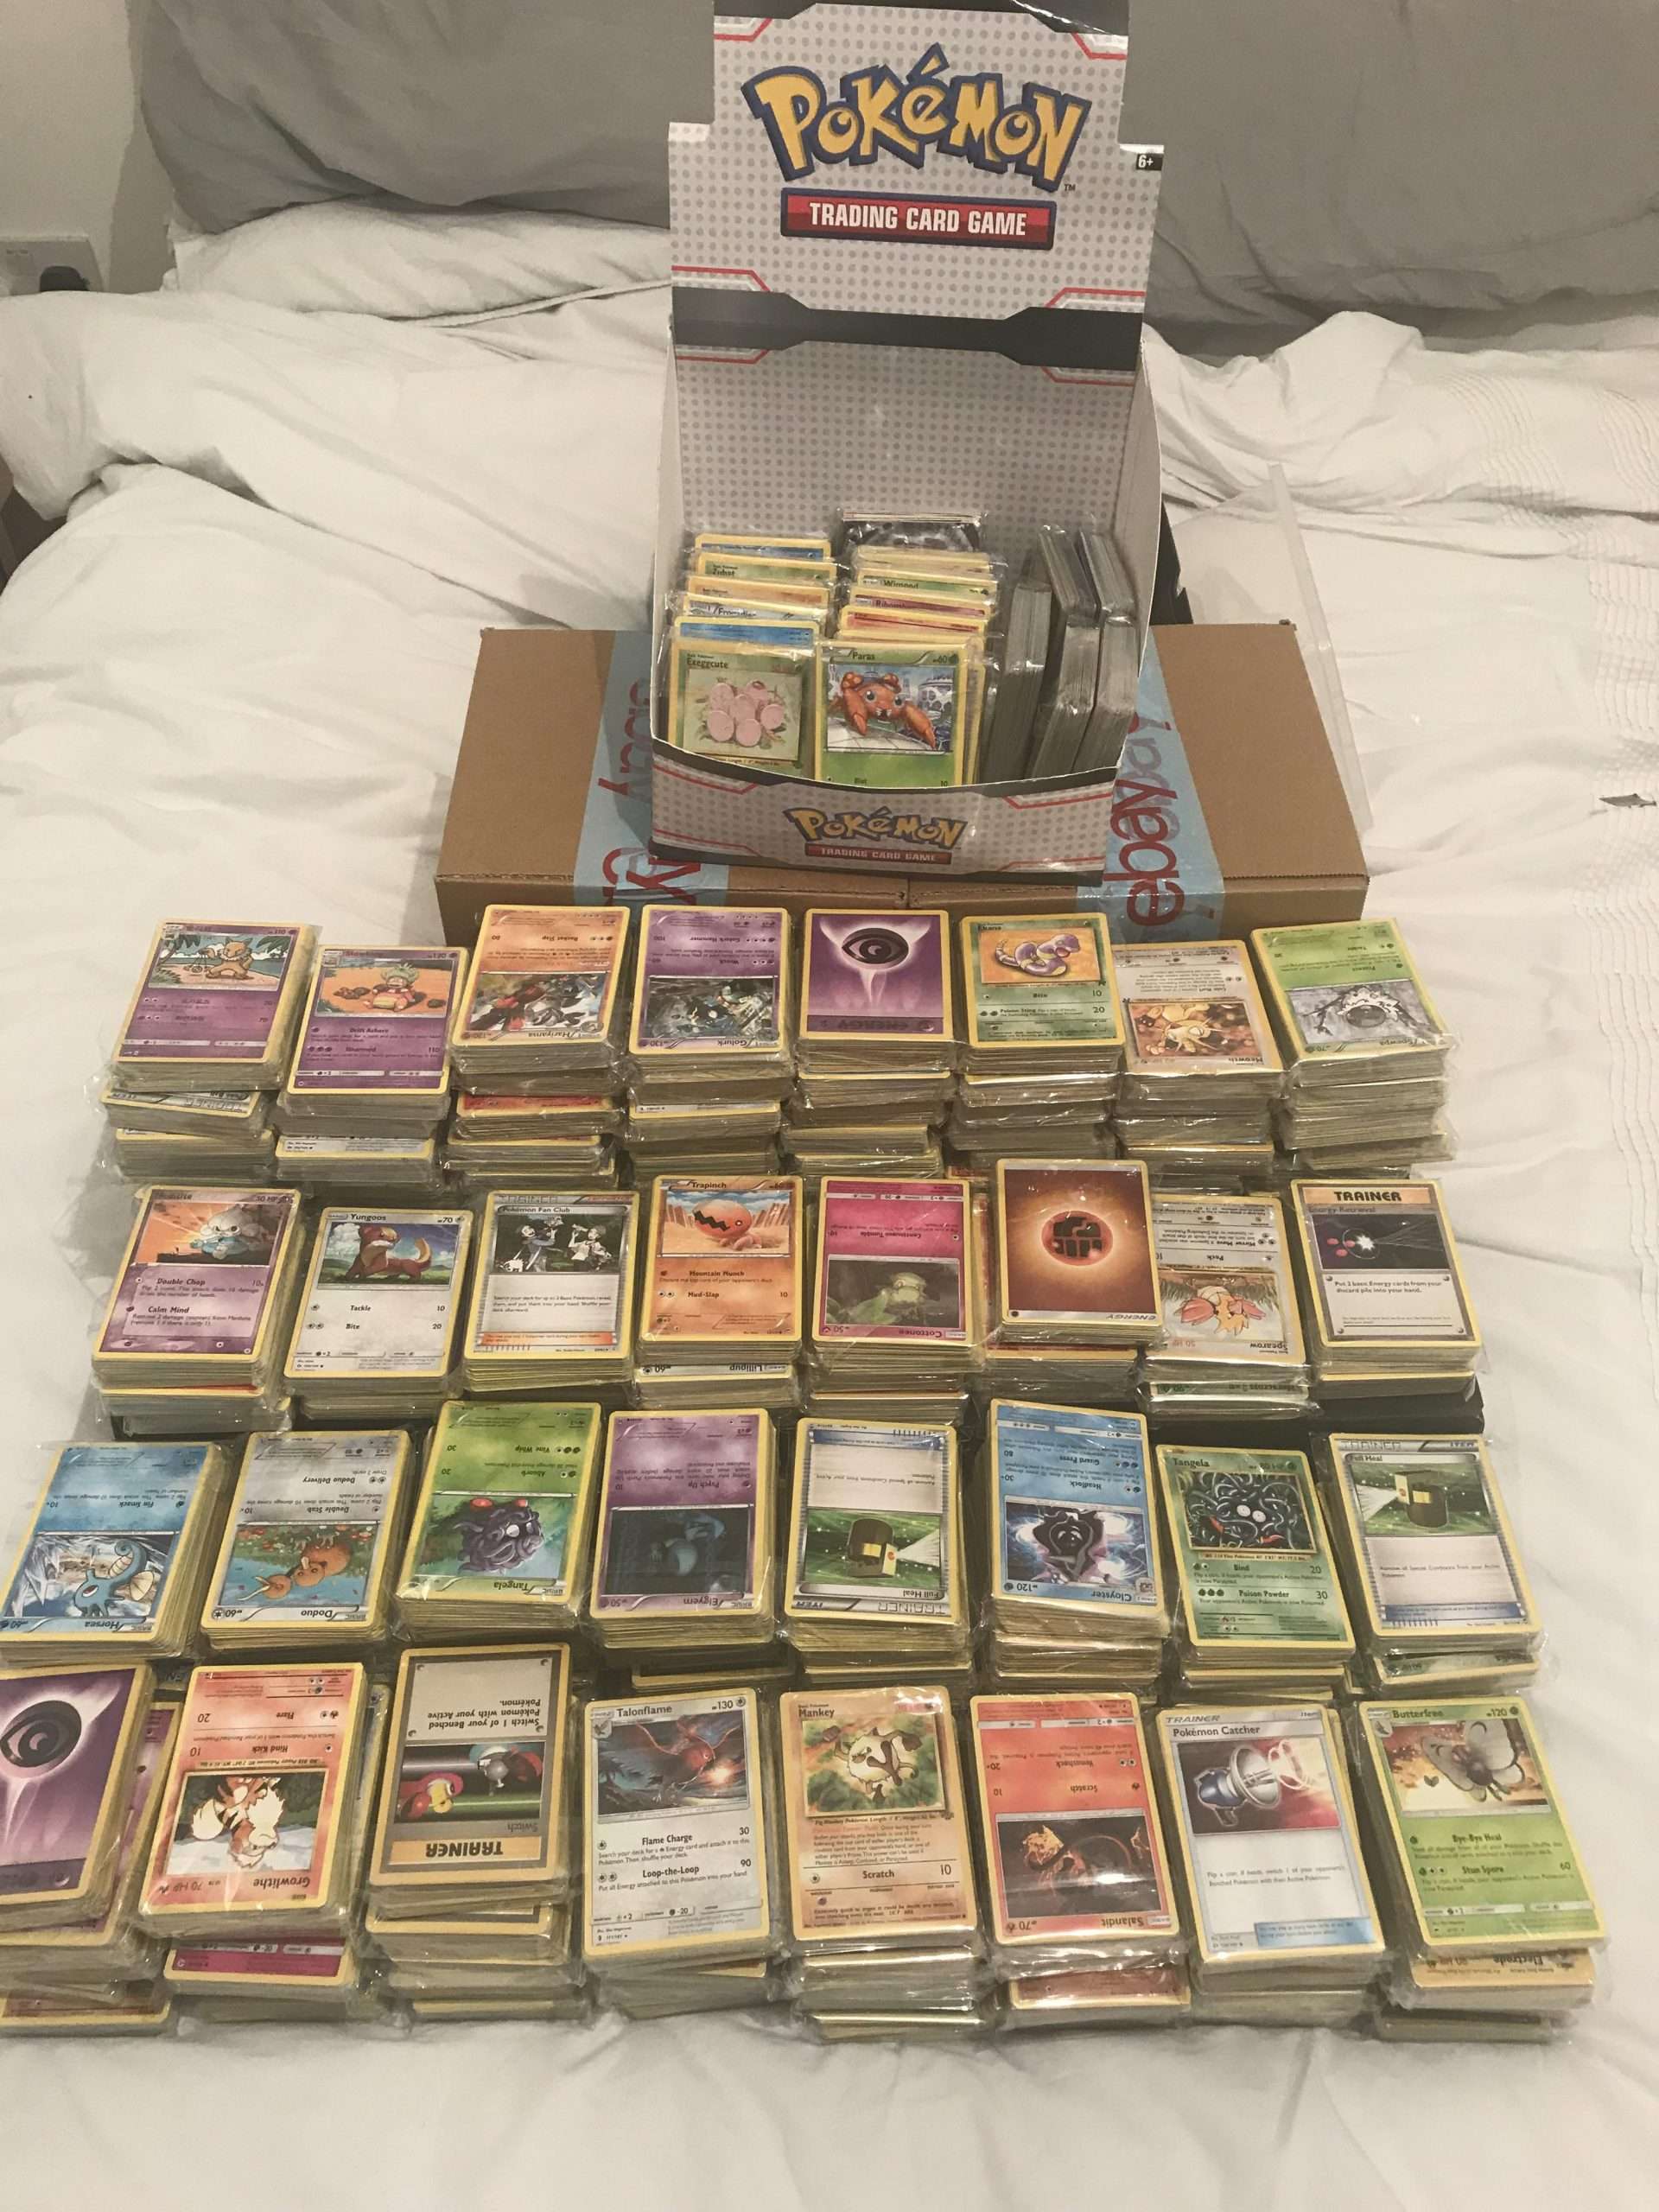 So i have 9k bulk pokemon cards what are they worth? : PokemonTCG